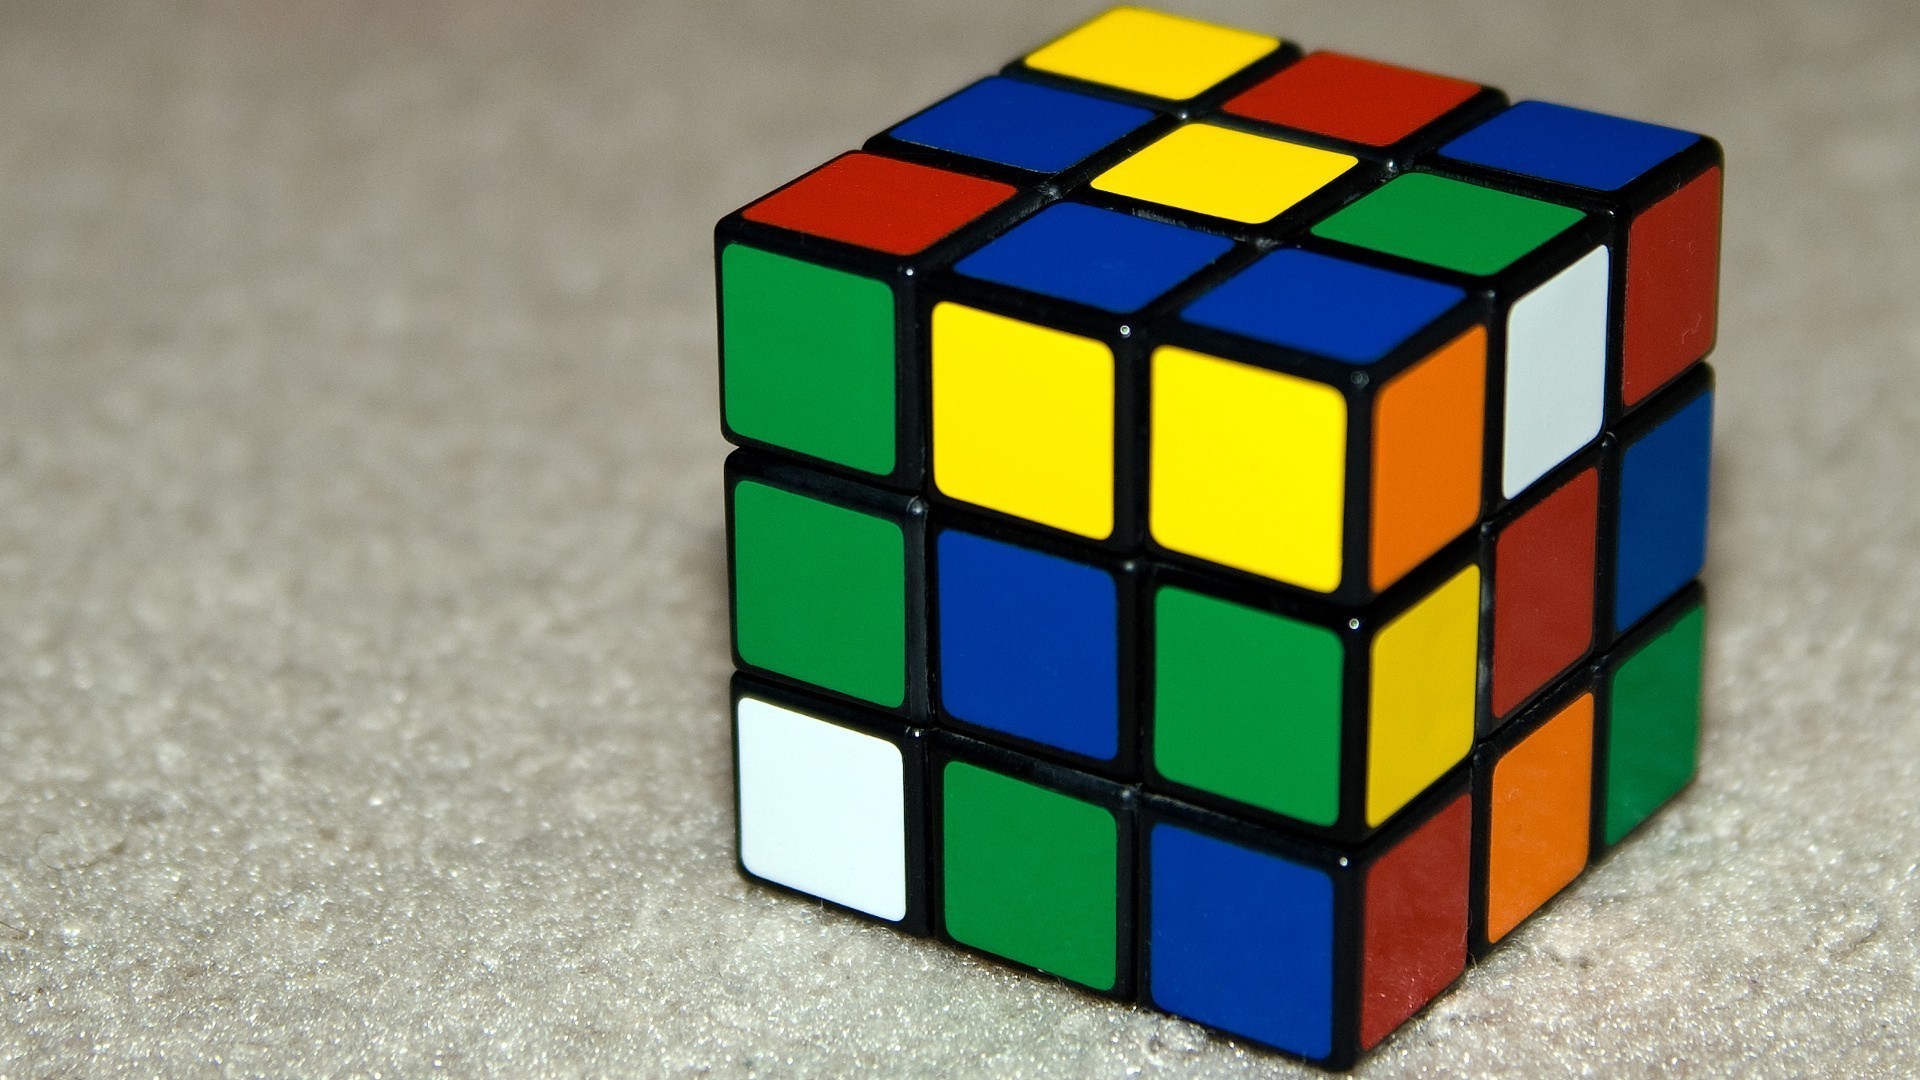 rubiks cube wallpaper,rubik's cube,toy,puzzle,mechanical puzzle,educational toy